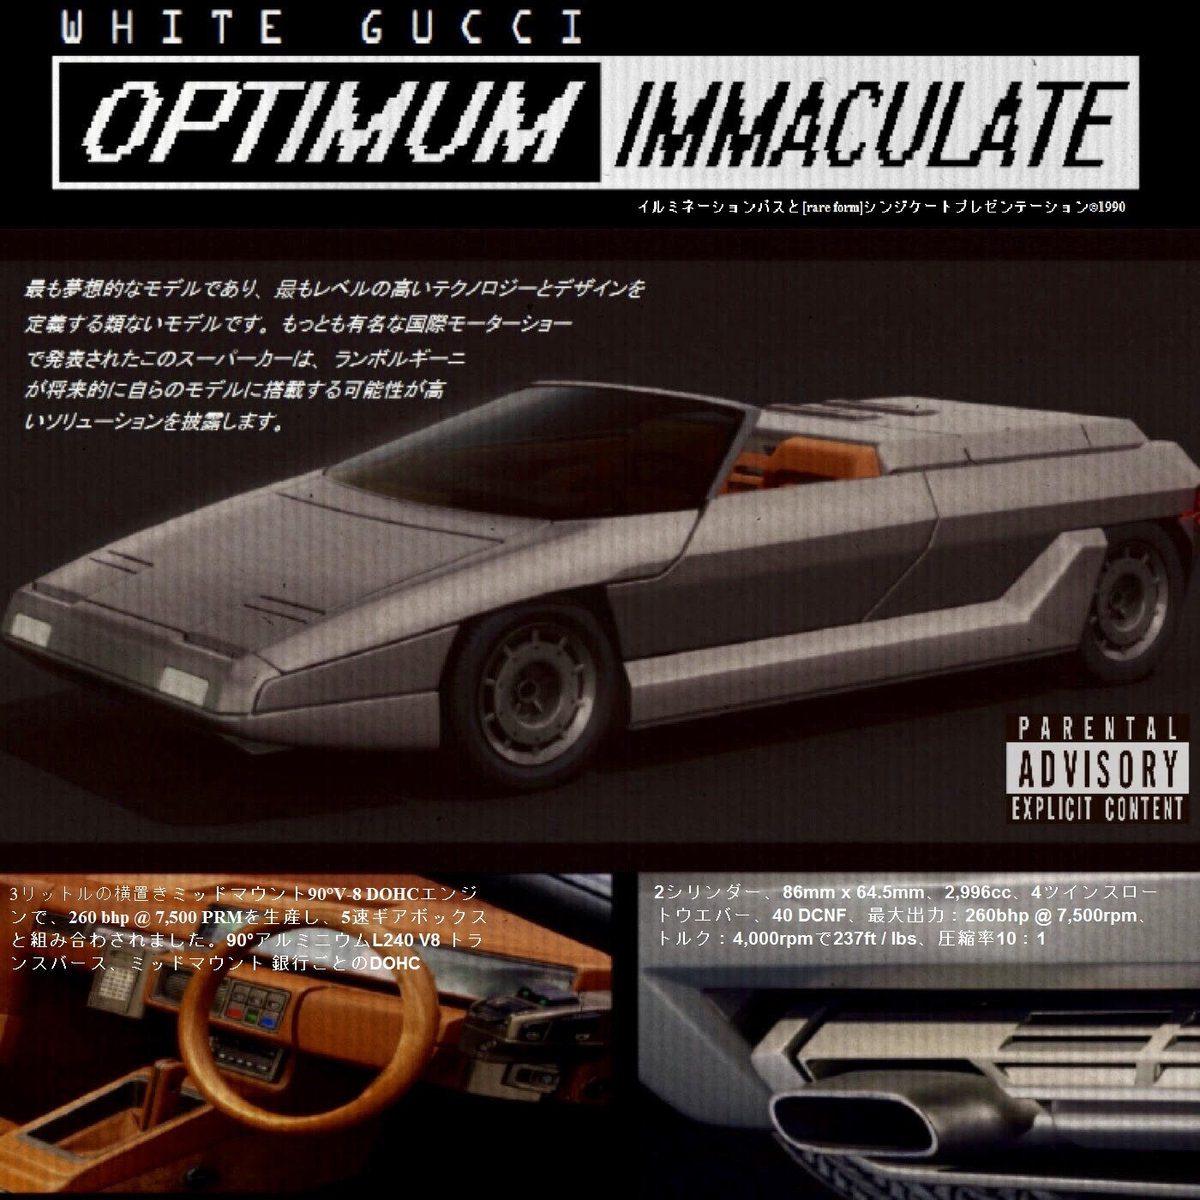 New Album By White Gucci - Optimun Immaculate